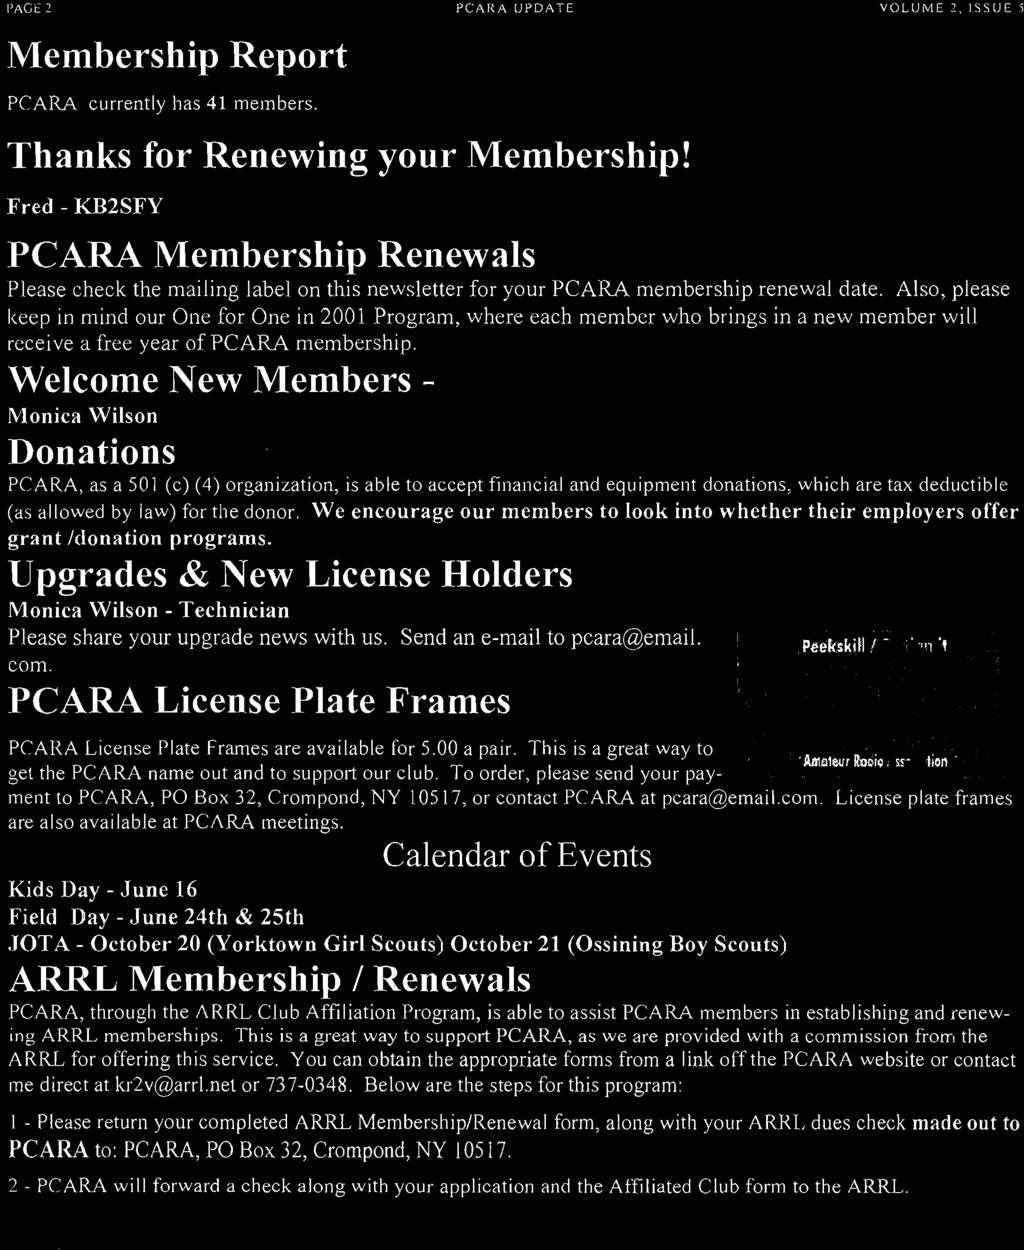 Also, please keep in mind our One for One in 2001 Program, where each member who brings in a new member will receive a free year ofpcara membership.